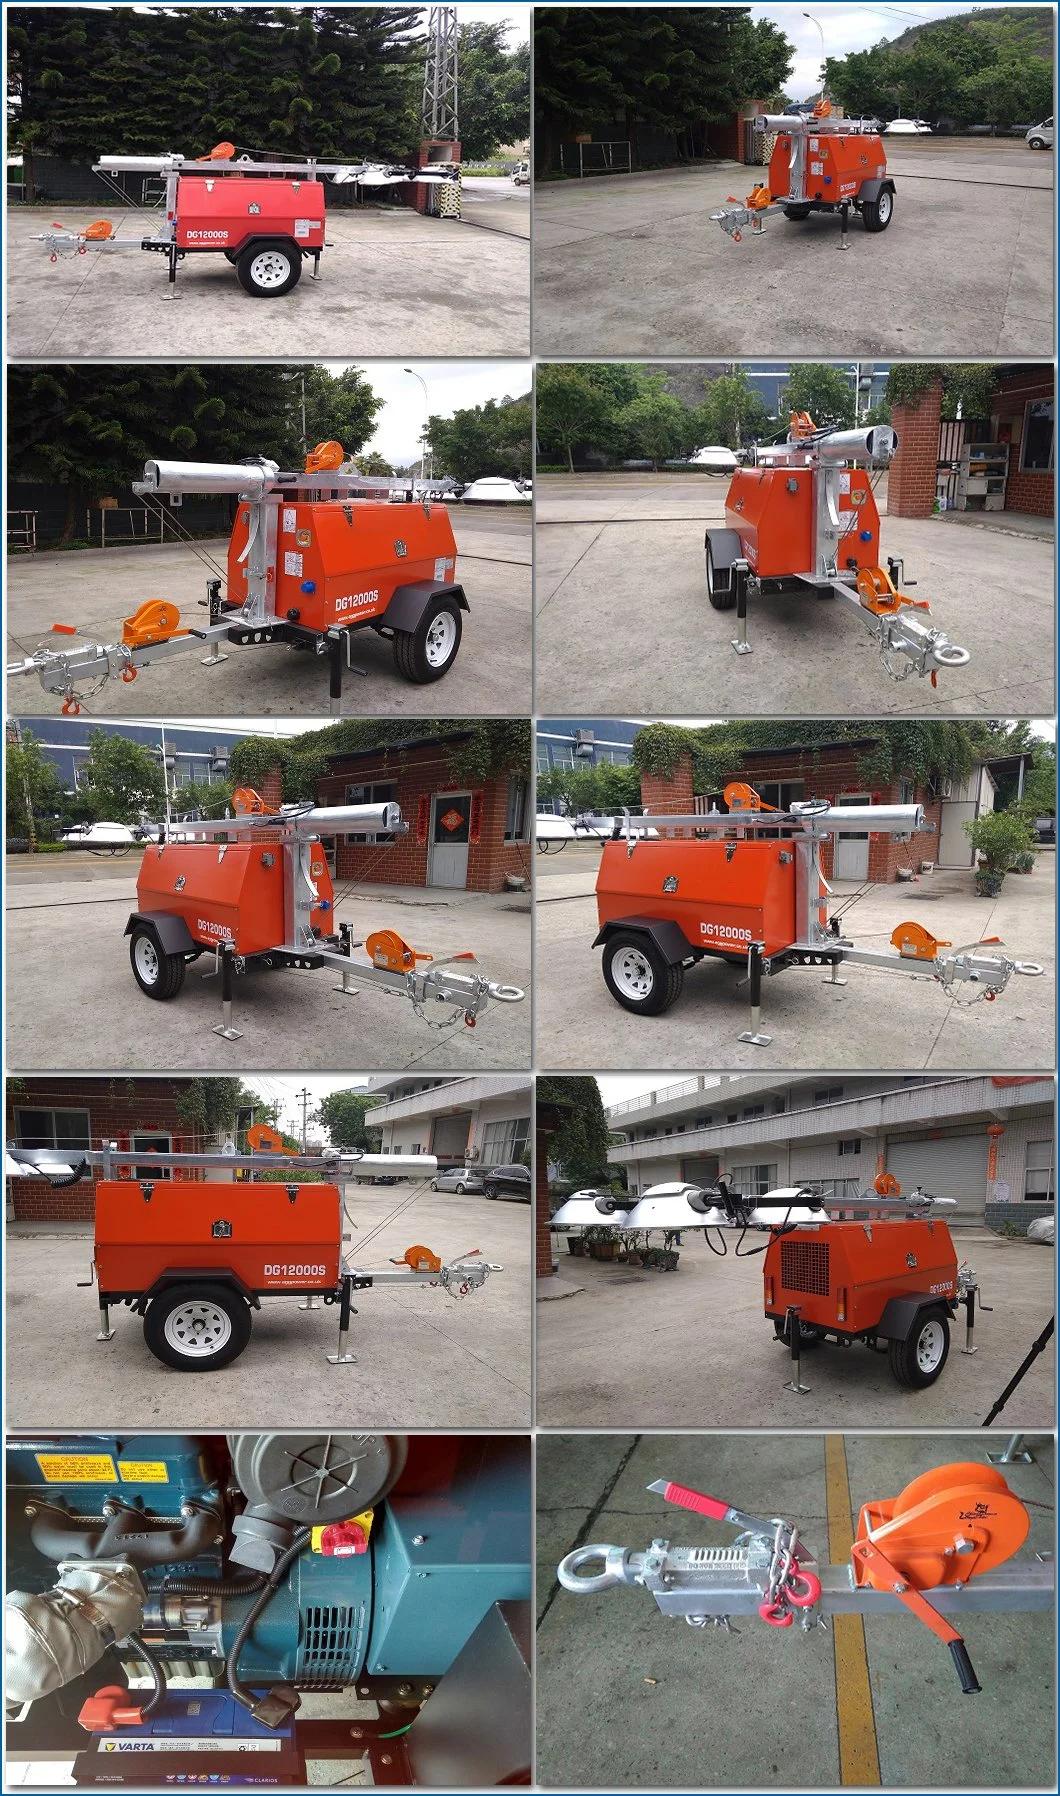 Trailer-Mounted Portable Compact Emergency Mobile Light Tower with Trailer and Yanmar Power